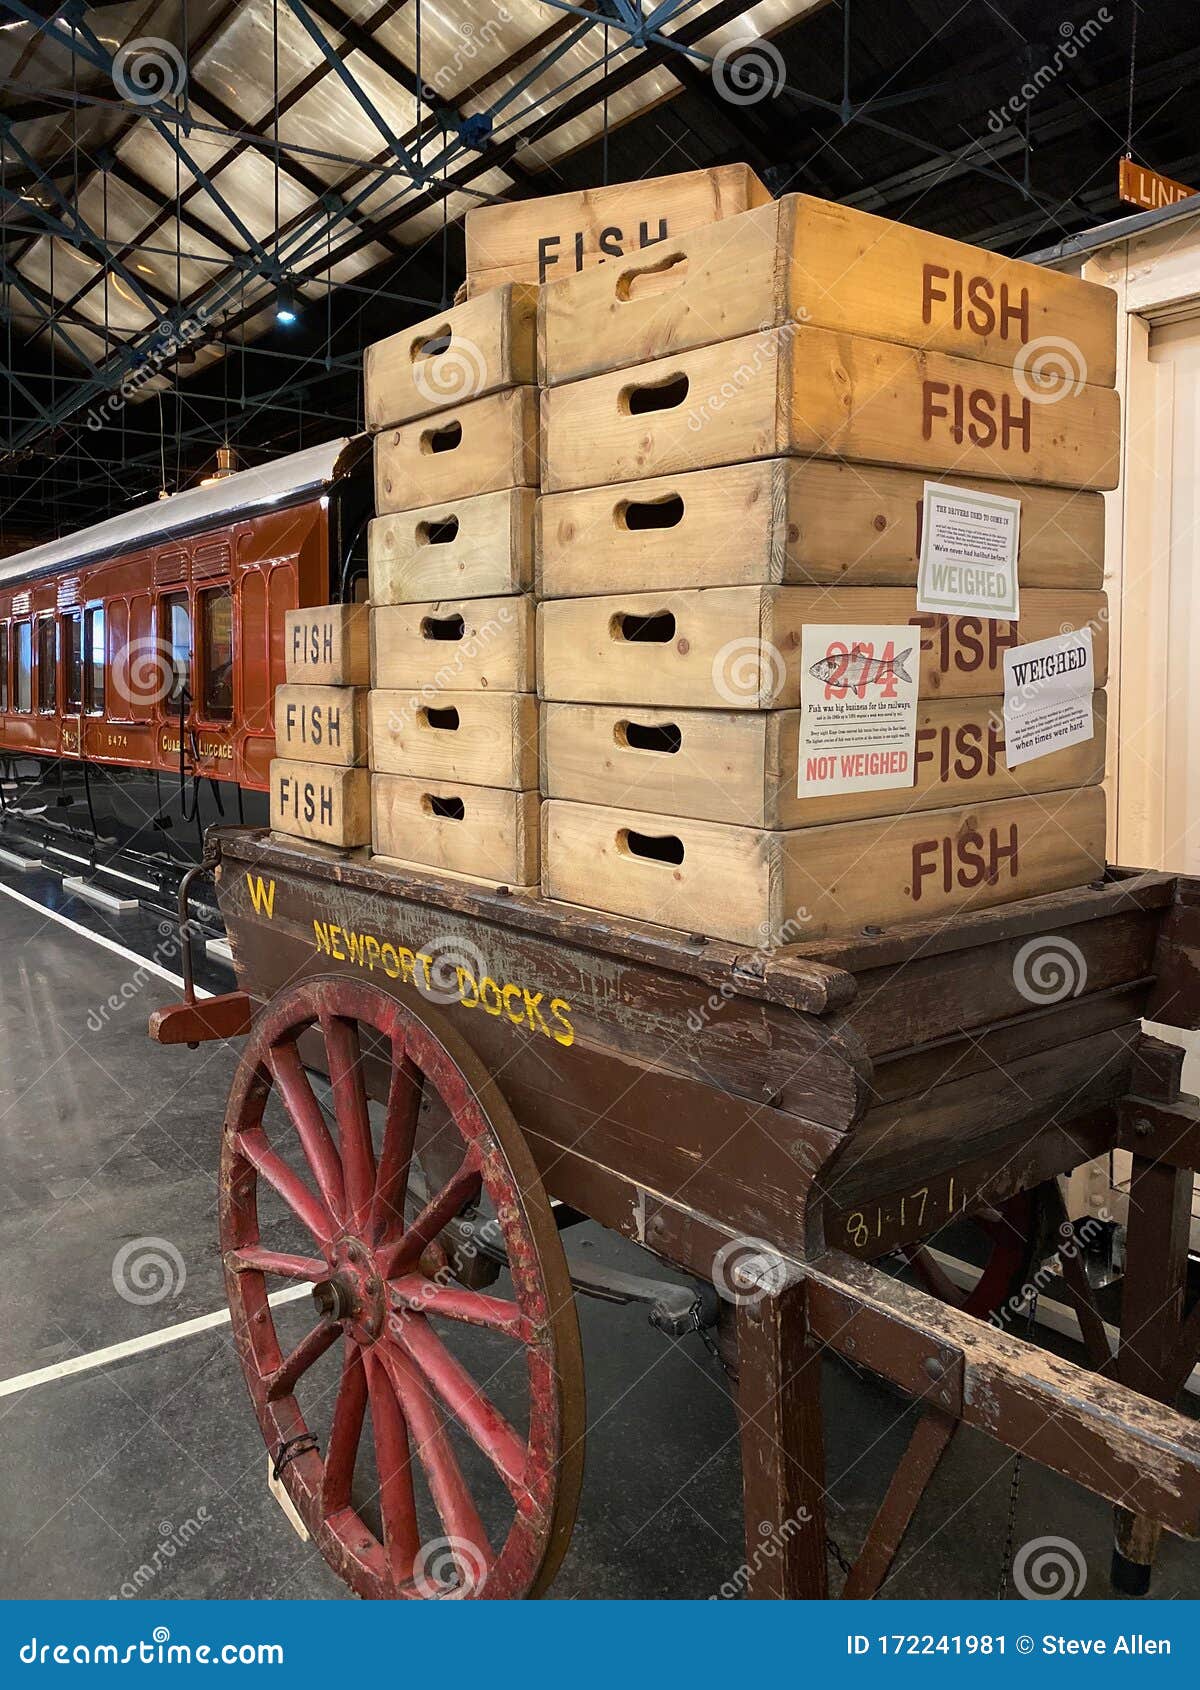 https://thumbs.dreamstime.com/z/hand-cart-wooden-fish-boxes-vintage-circa-s-national-railway-museum-york-england-172241981.jpg